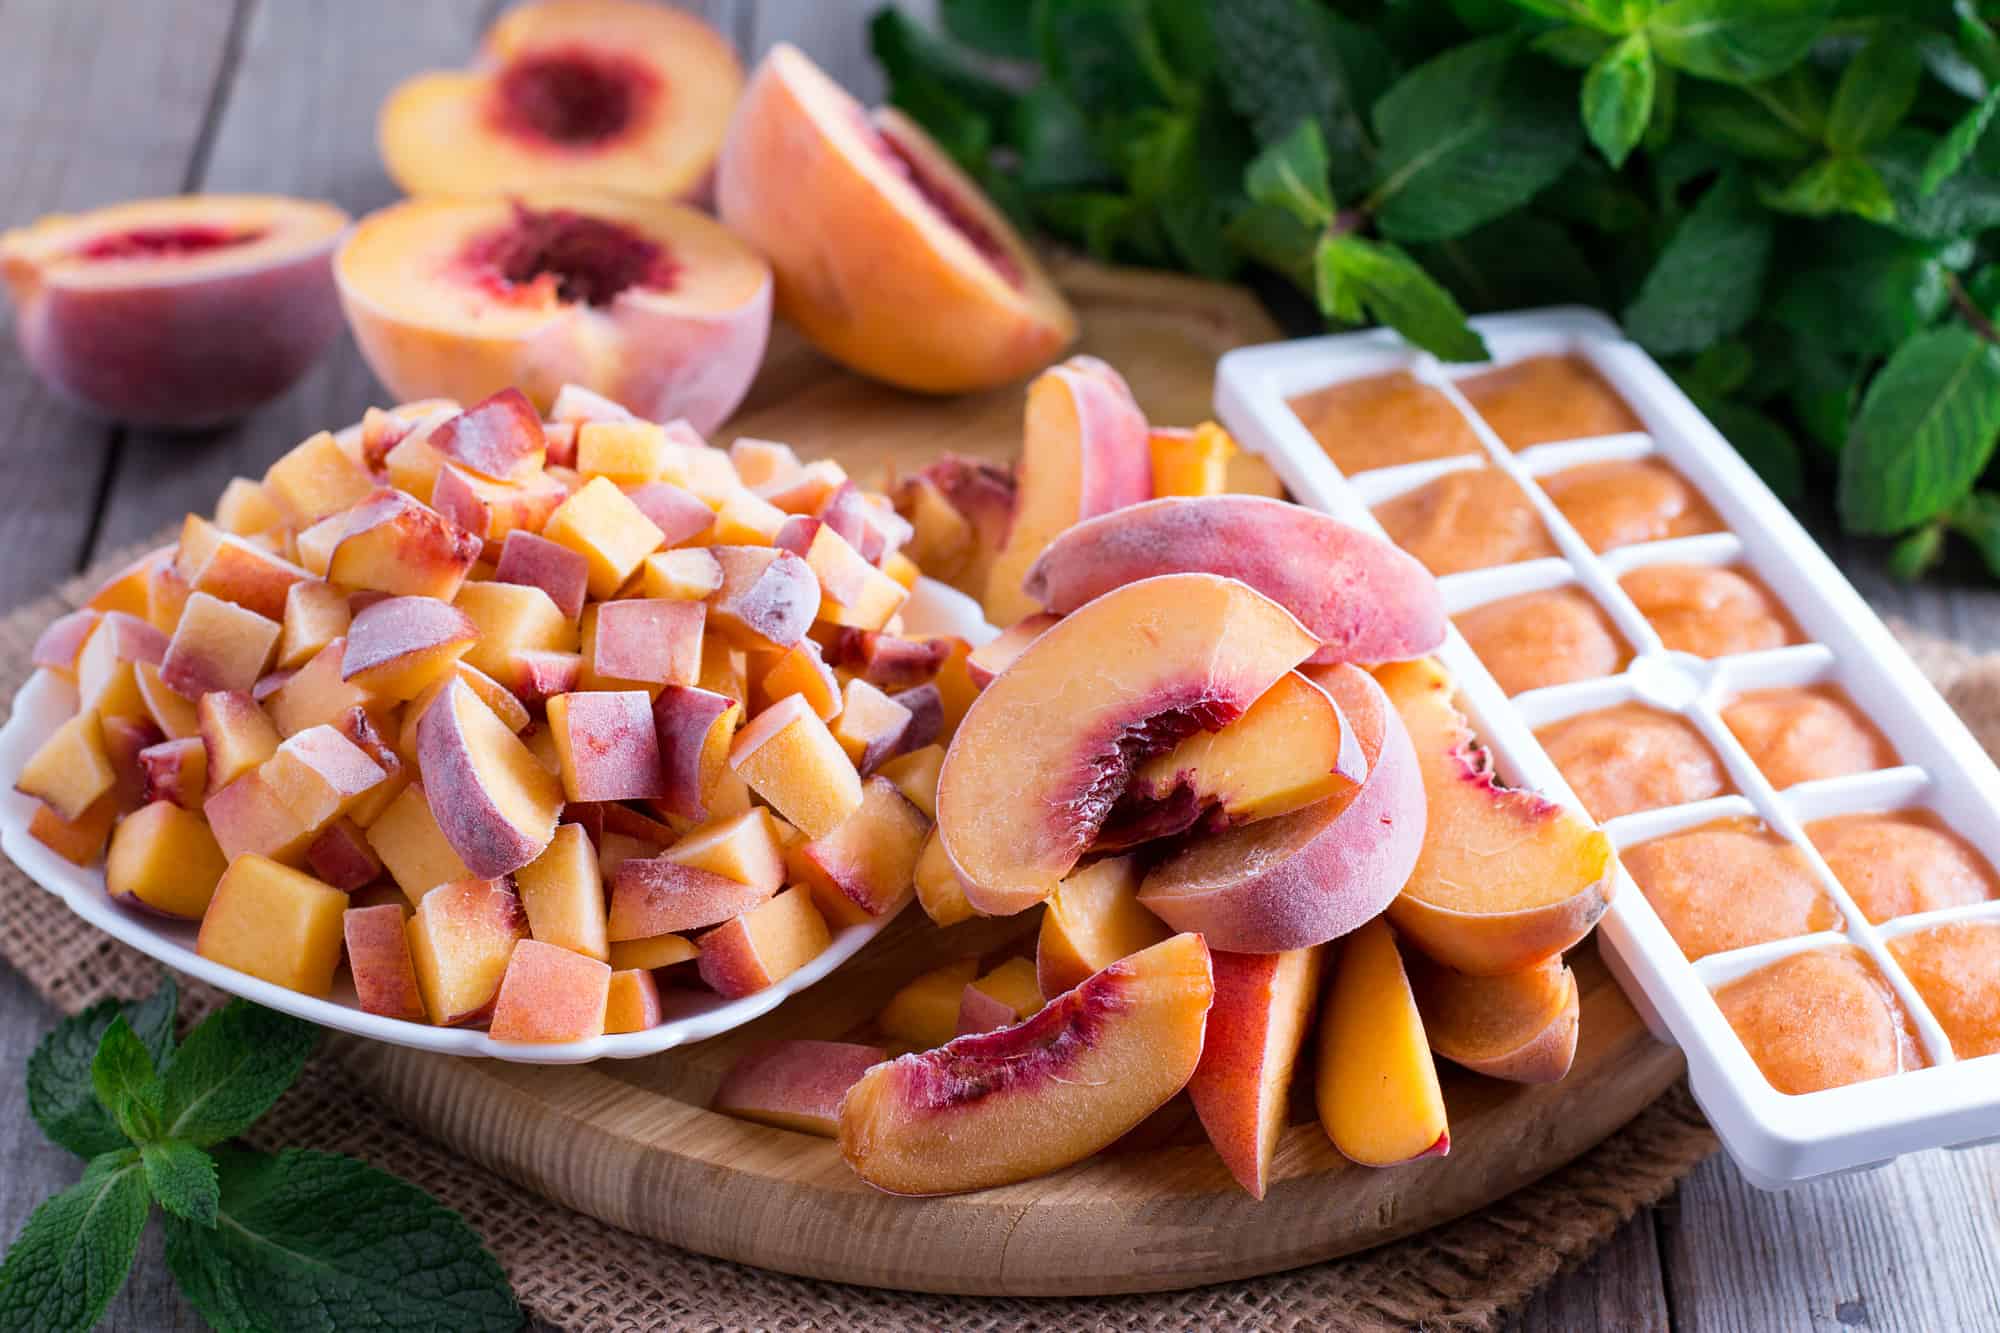 Learn how to freeze fresh peaches by making peach ice cubes on a wooden cutting board.